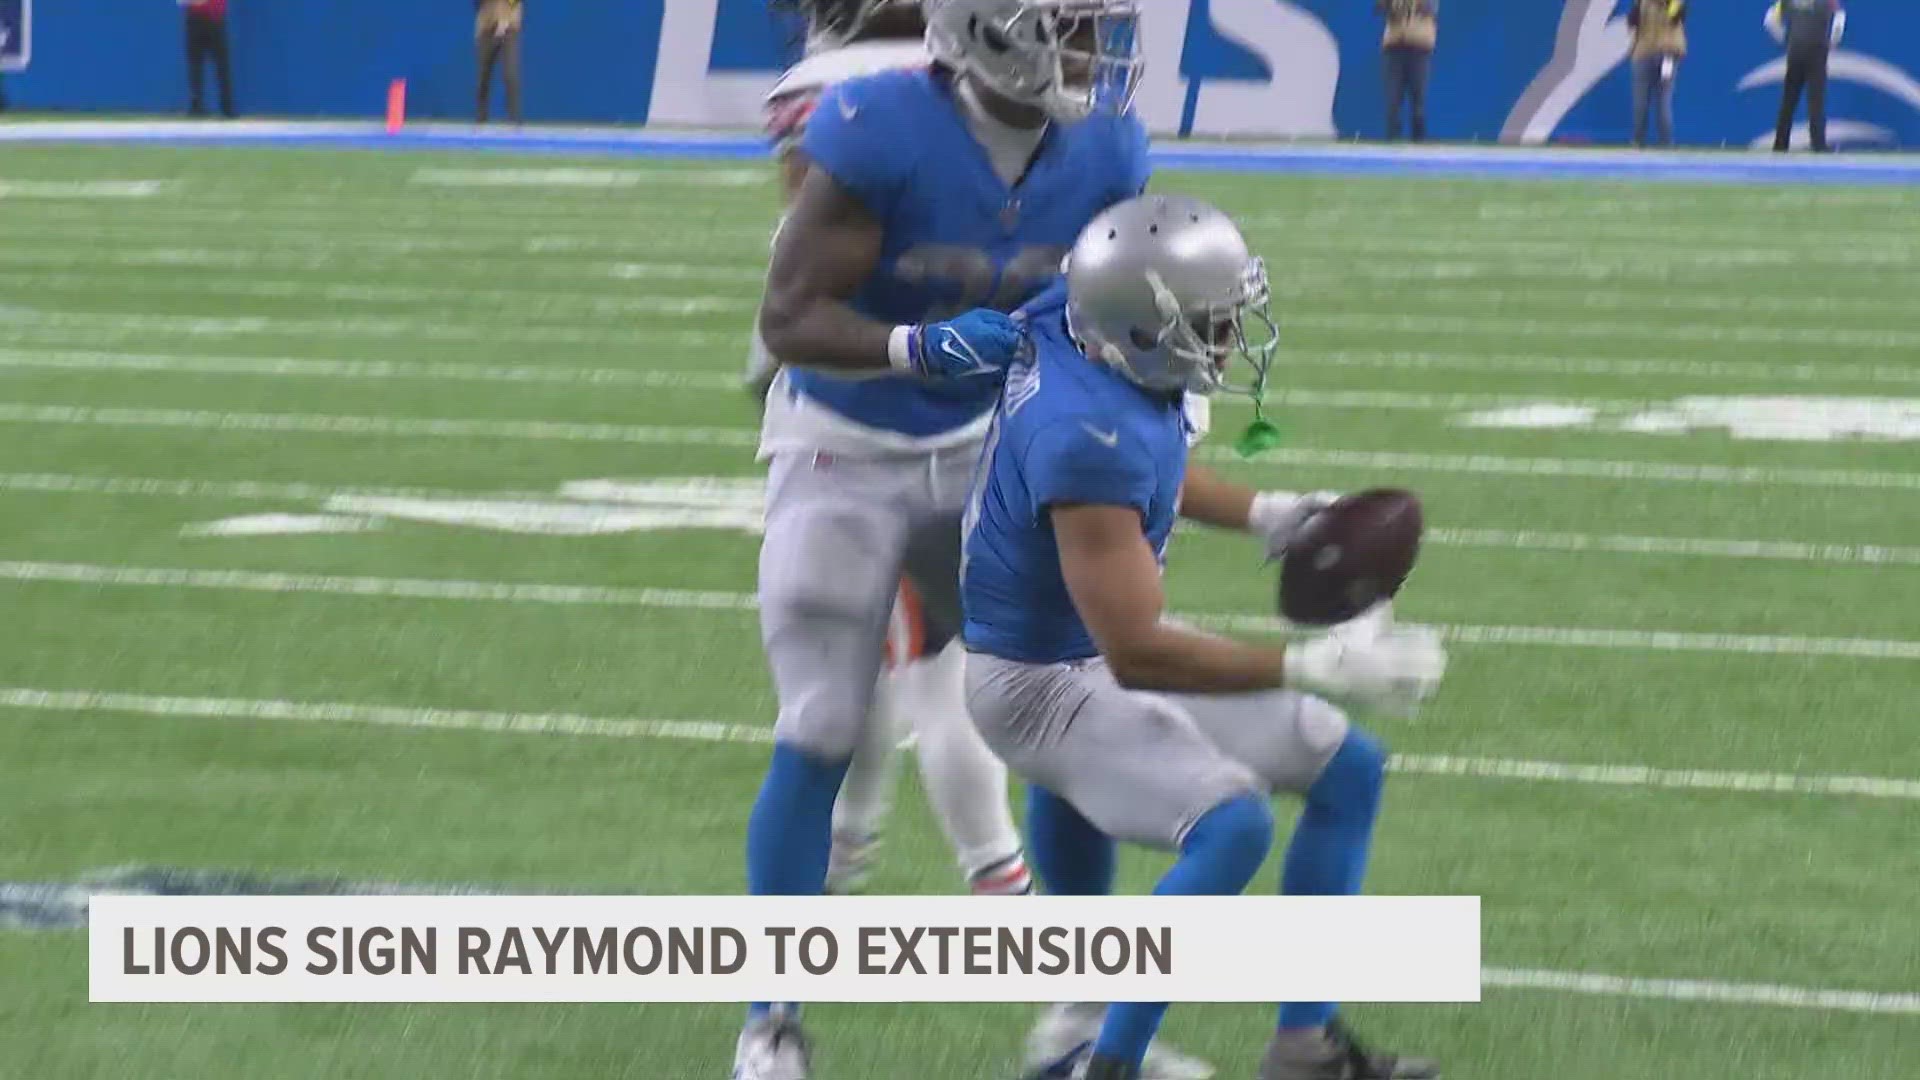 Lions sign Raymond to extension